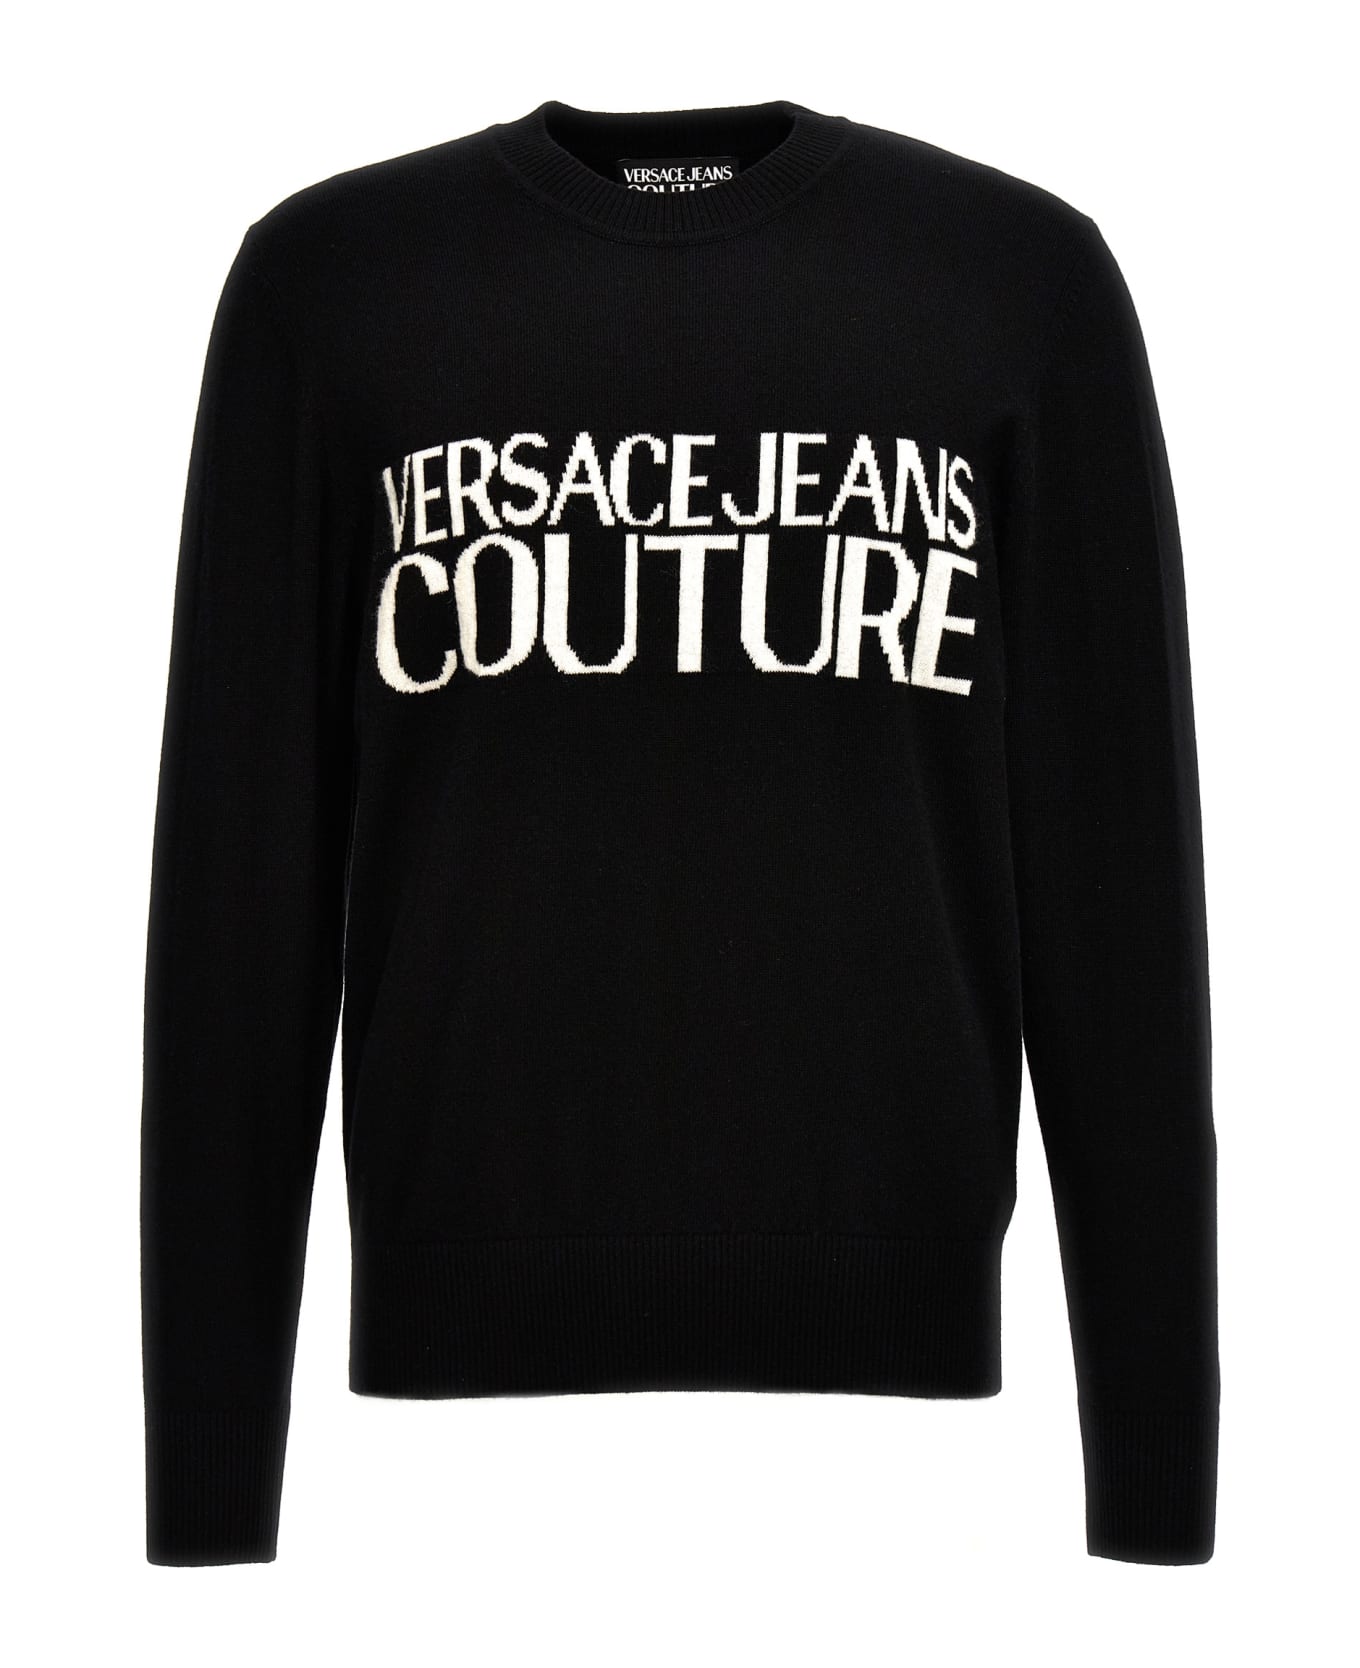 Versace Jeans Couture Logo Intarsia Sweater - White/Black ニットウェア